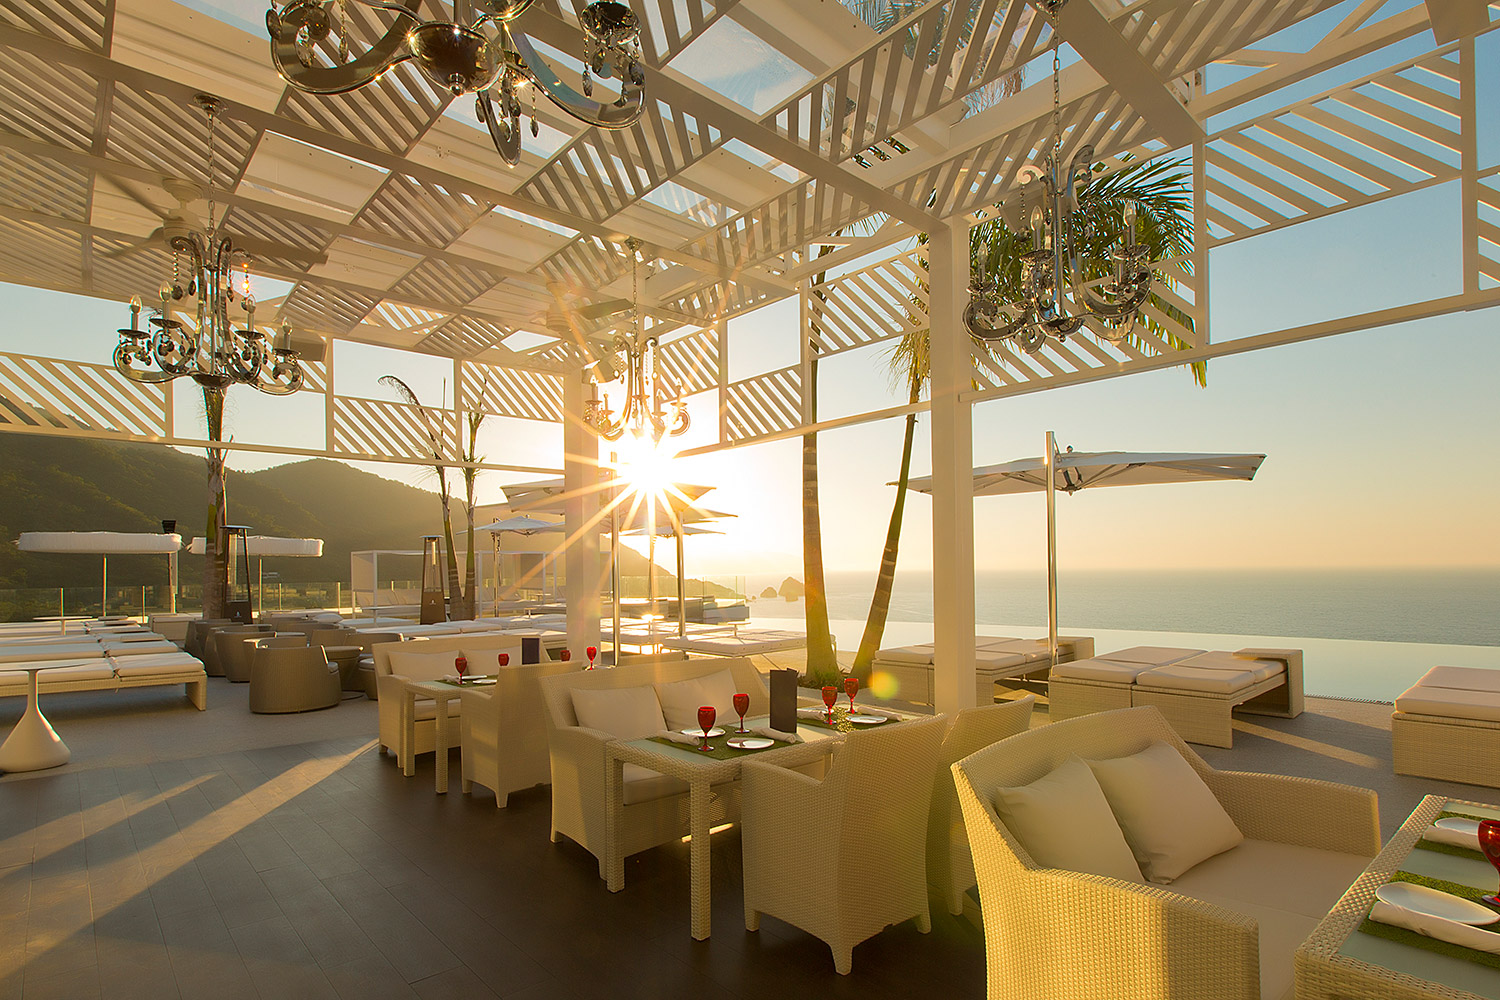 Designer Inspiration at The Rooftop at Hotel Mousai